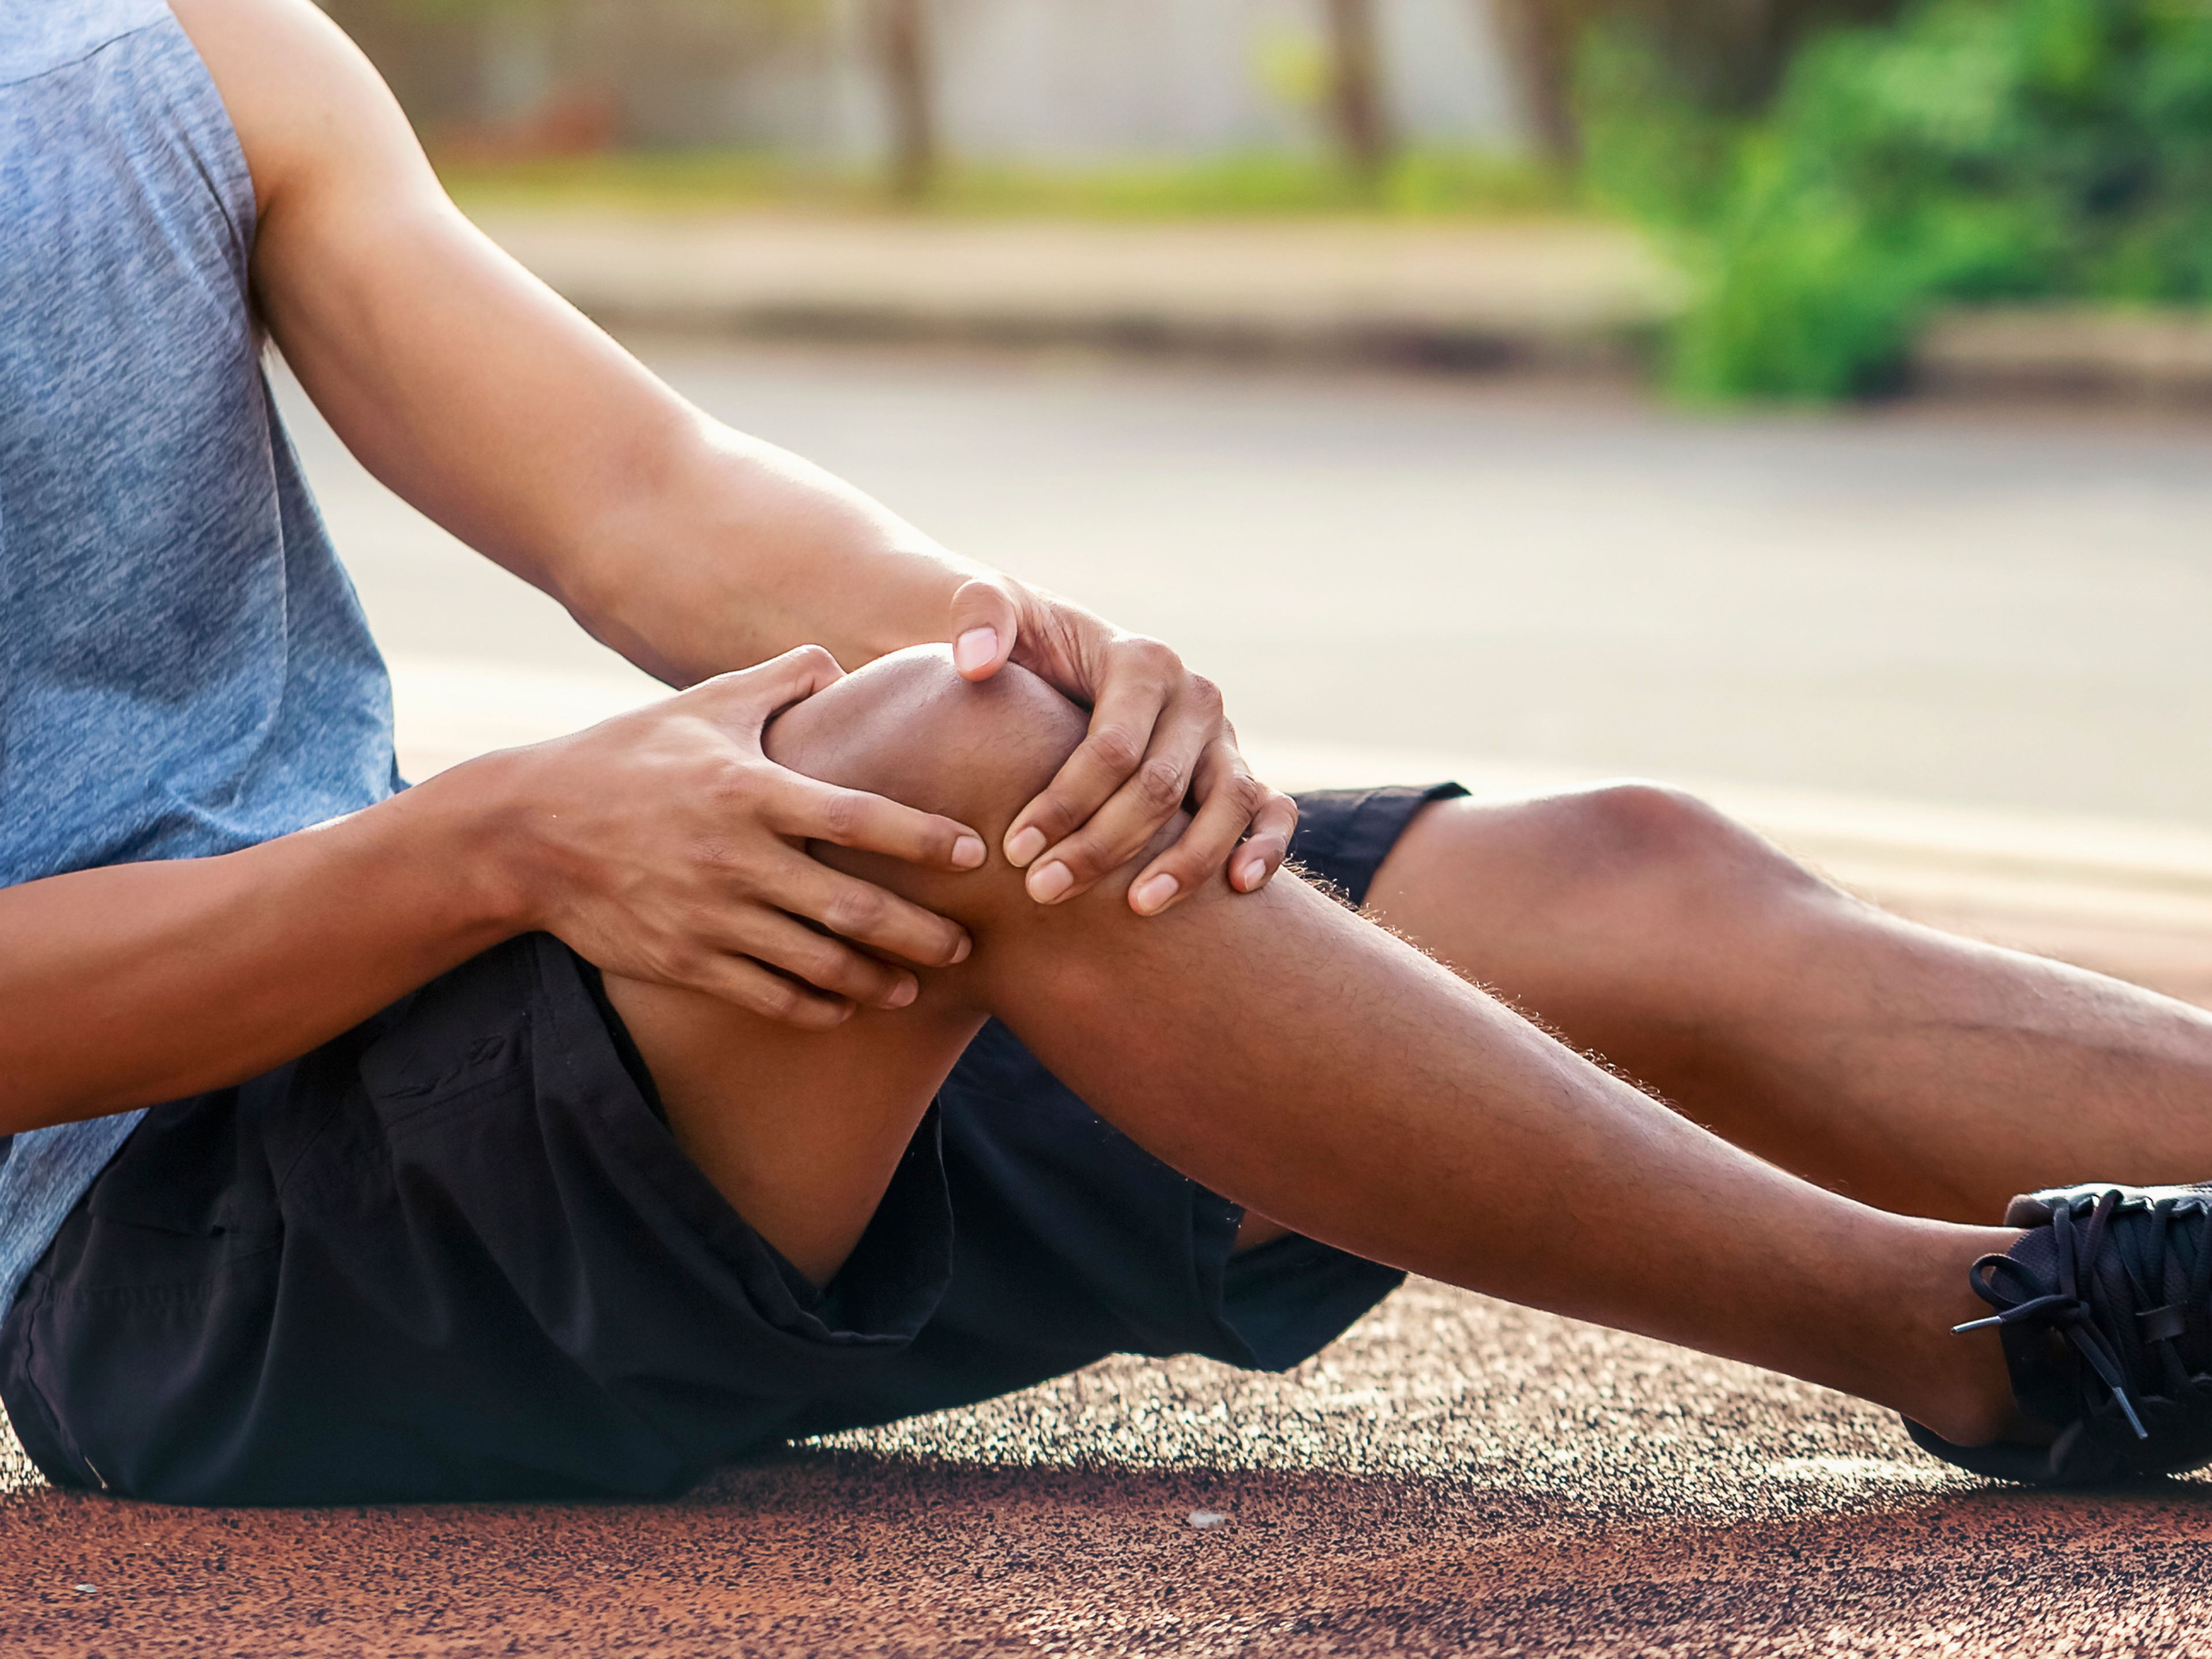 The intensity of your pain doesn't tell us much about the severity of your patellar tendonitis.